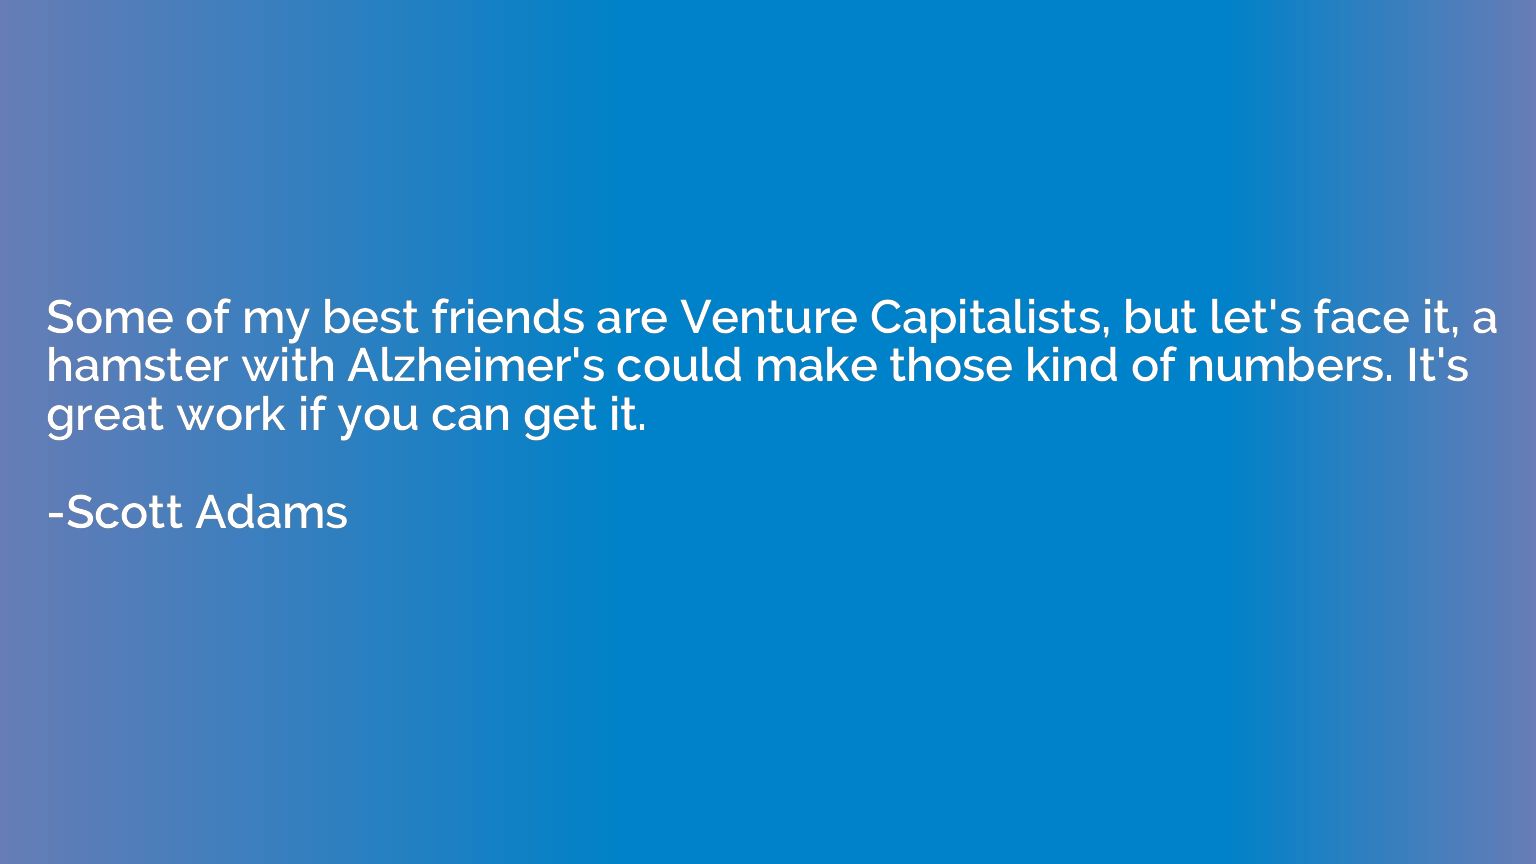 Some of my best friends are Venture Capitalists, but let's f